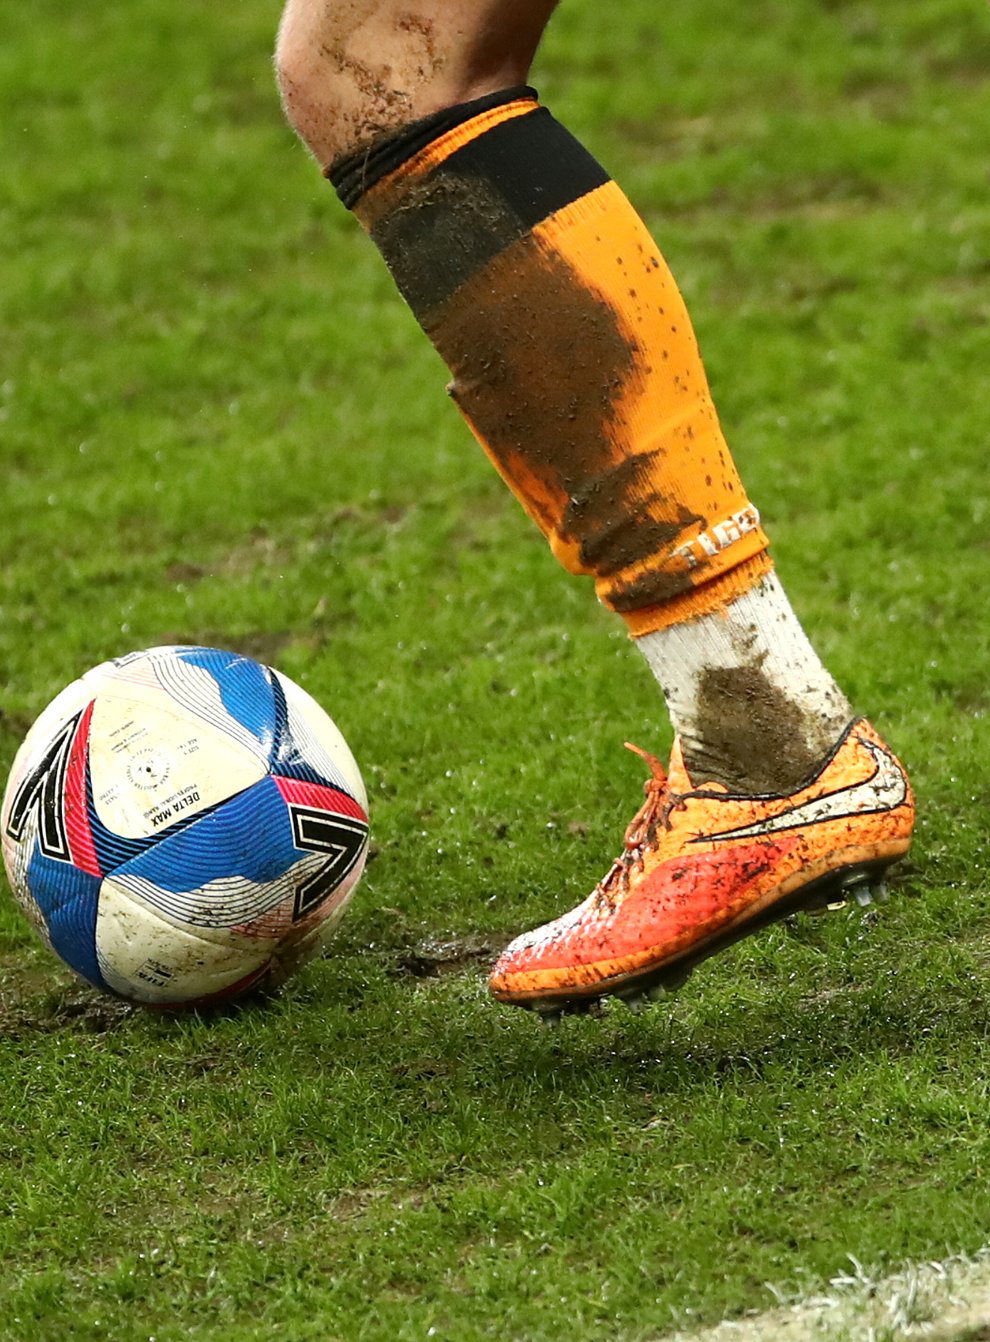 A general view of a football and a player's boots